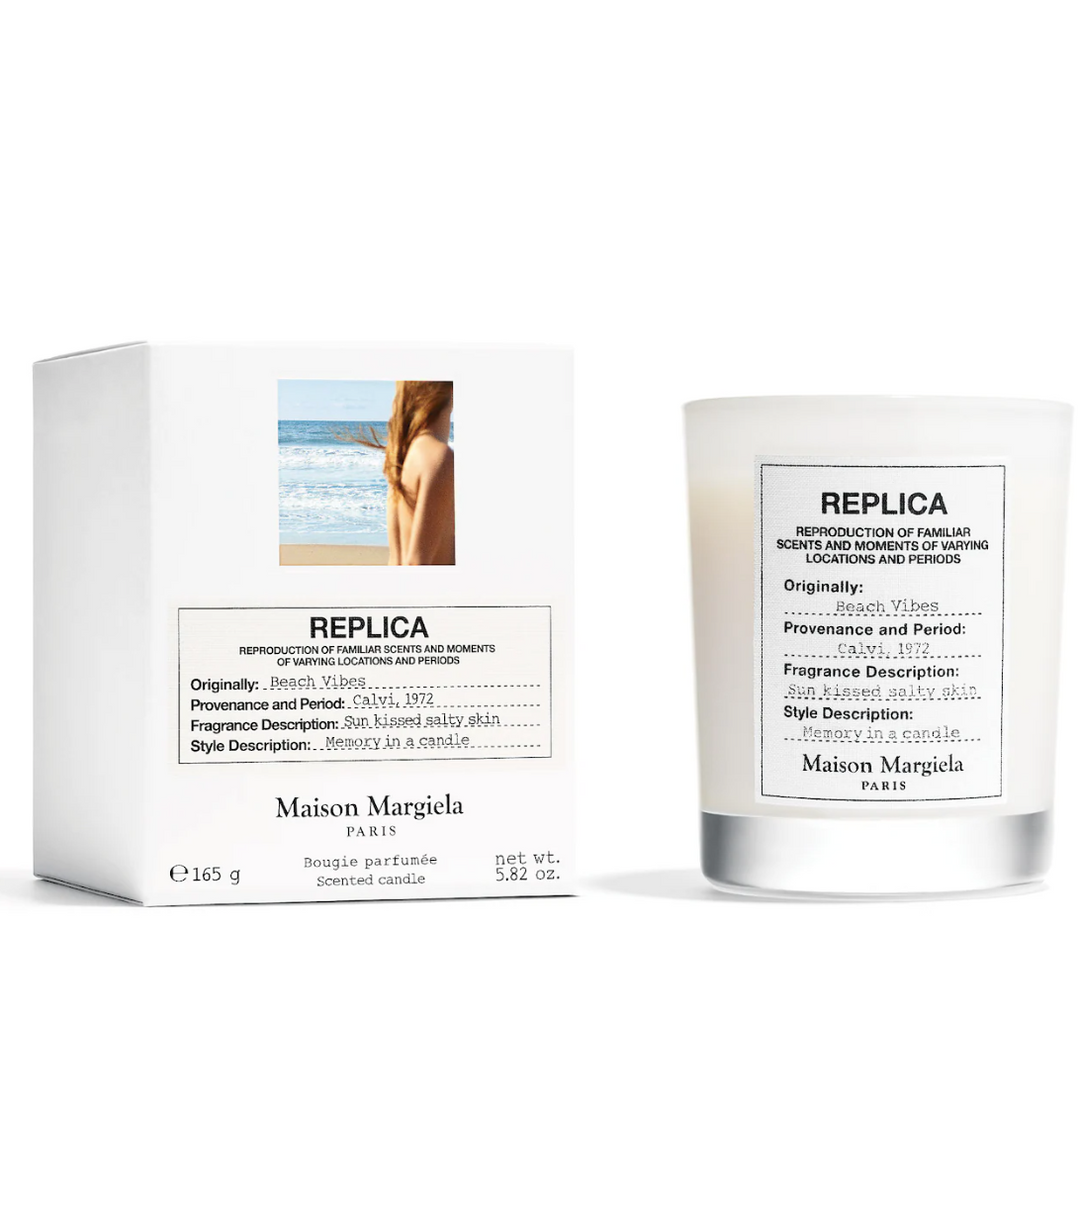 Maison Margiela 'REPLICA' Beach Vibes Scented Candle MSRP $70